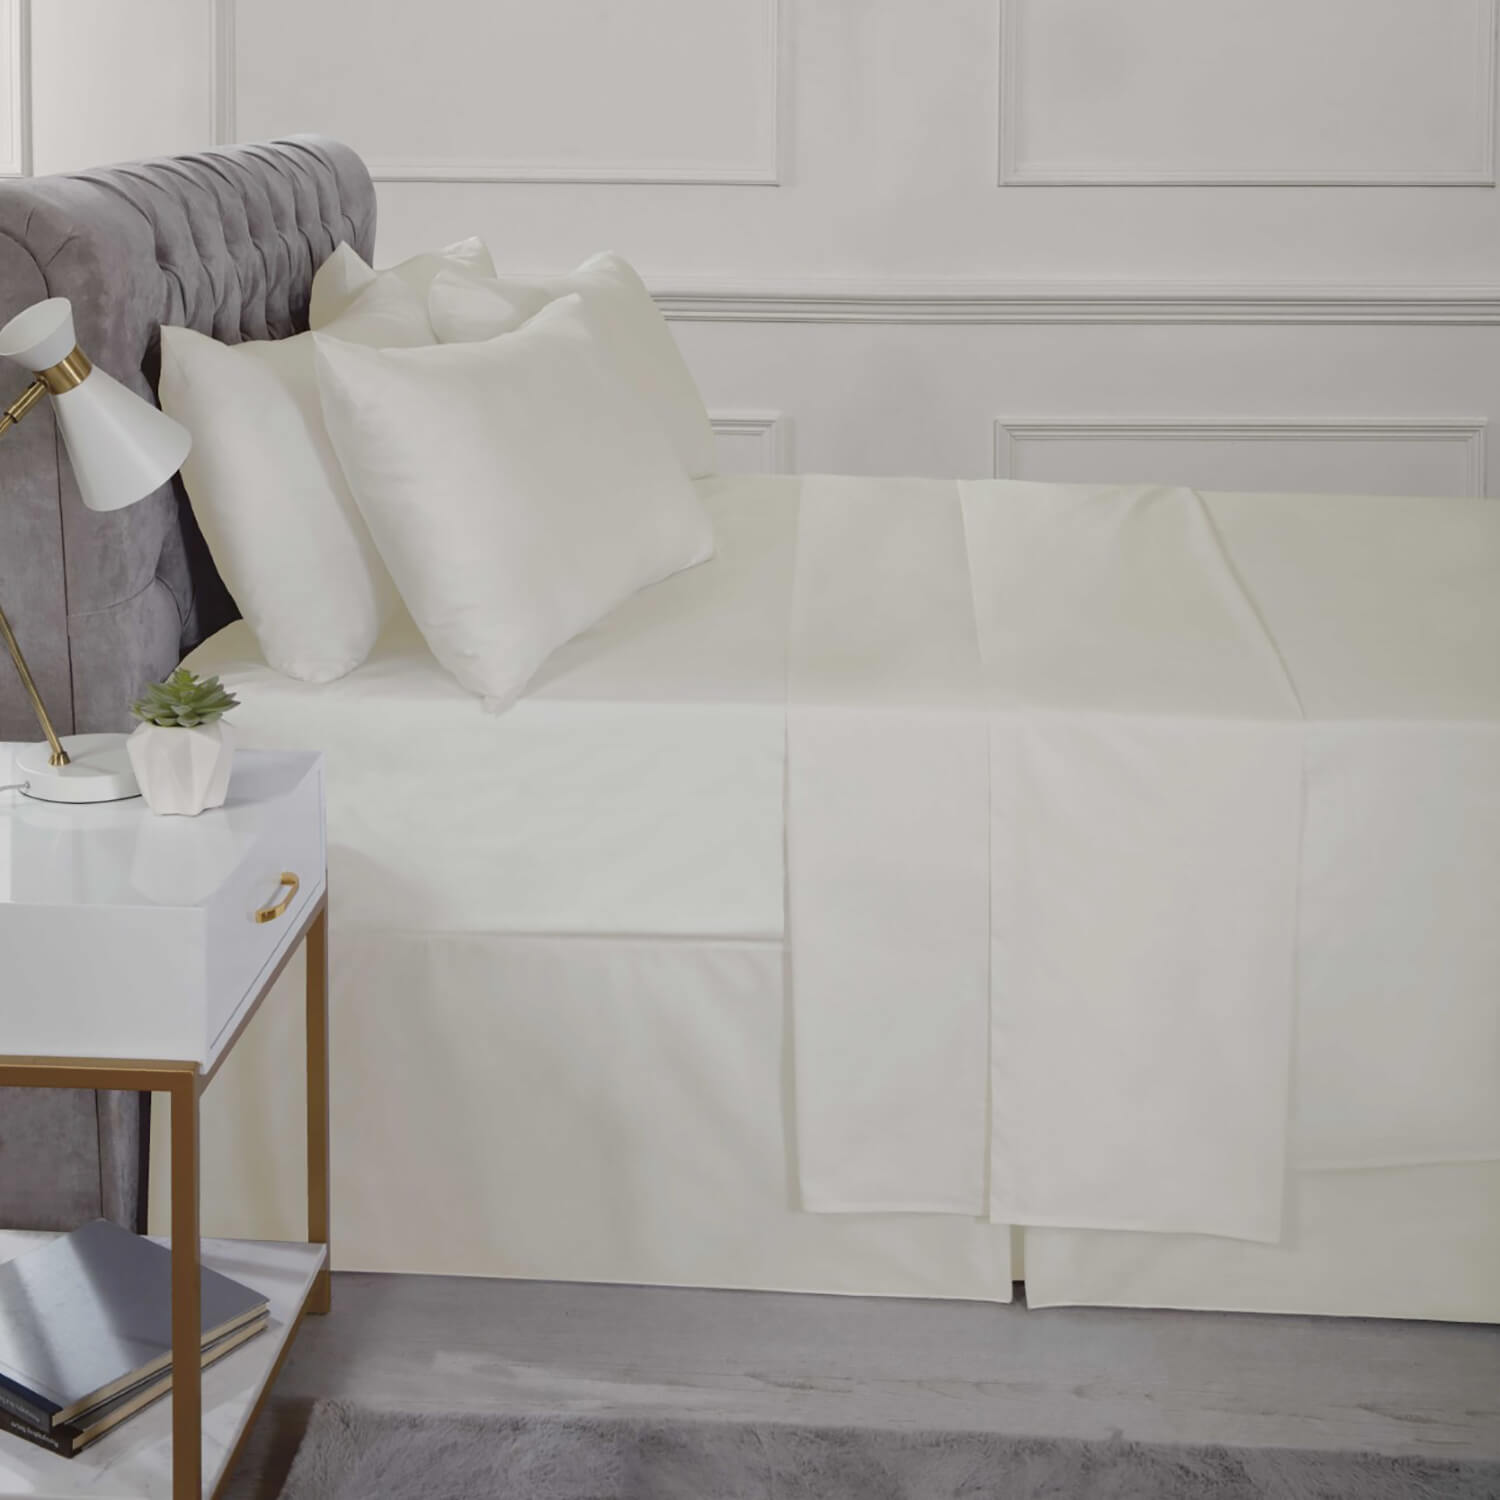 The Home Bedroom Easy Care Percale Pillowcase Pair - Cream 1 Shaws Department Stores